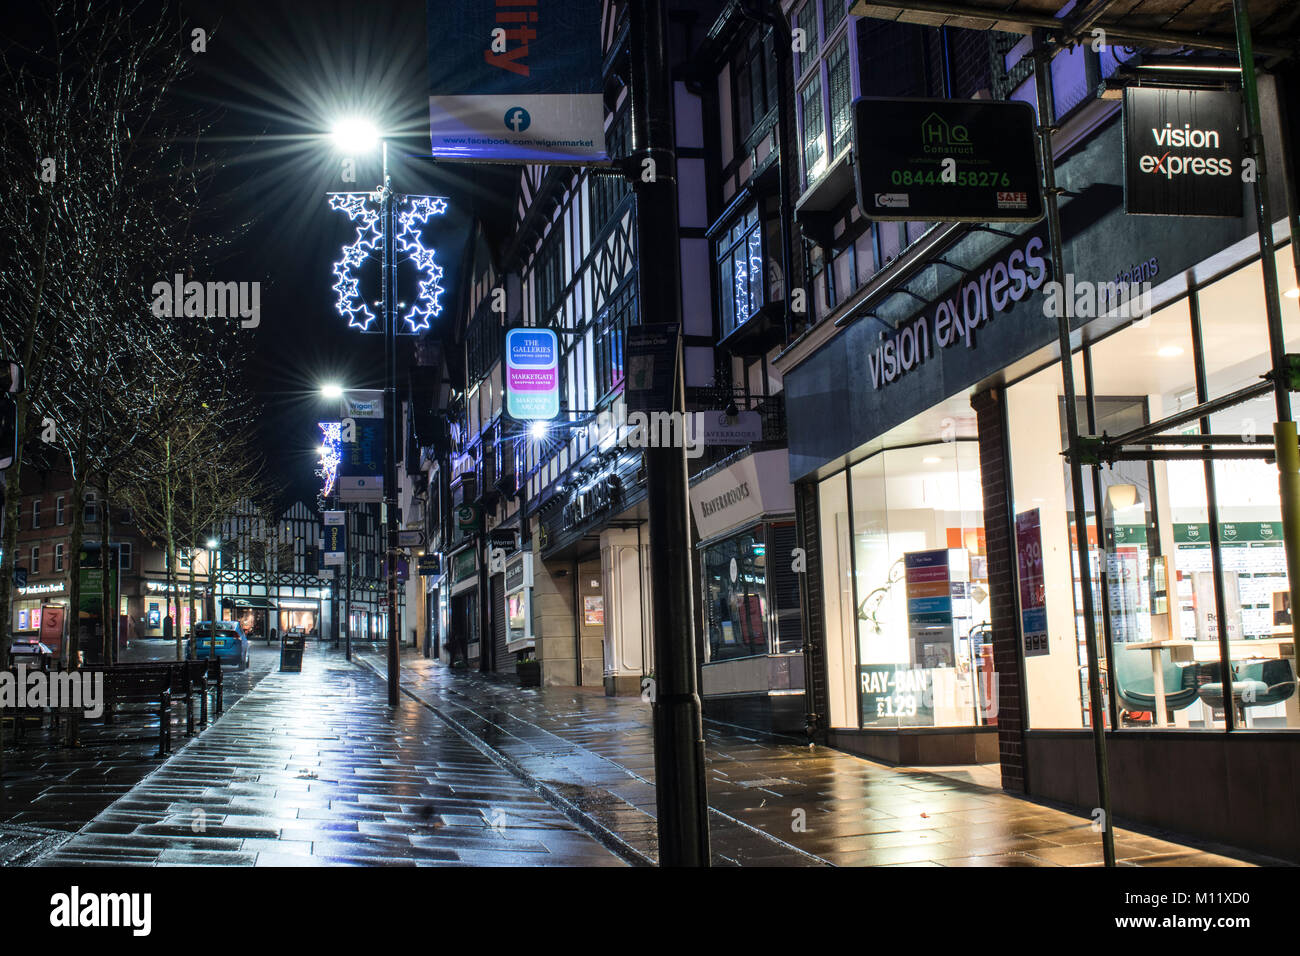 Wigan at Christmas. Very old fashioned scene here, looks great after being taken in the rain, reflects the light very well. Stock Photo